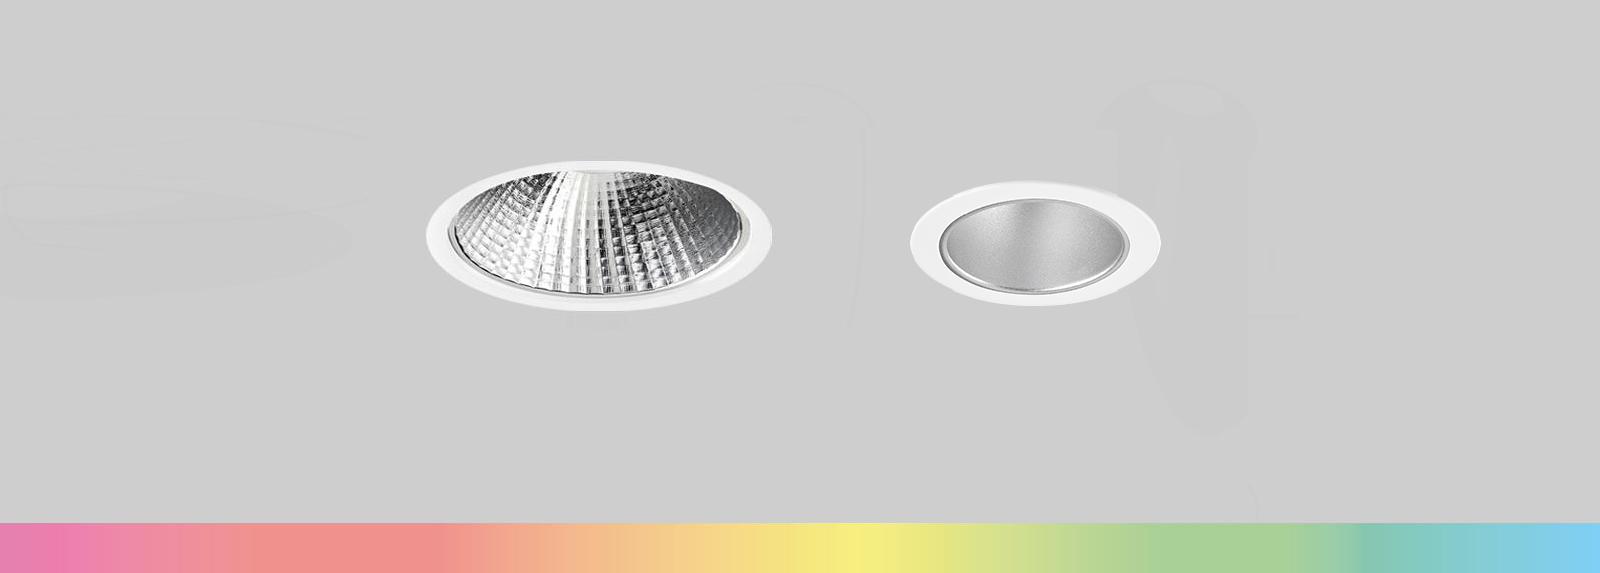 NUCLEONS OPTIMAL DISPLAY | Small recessed ceiling-mounted downlights